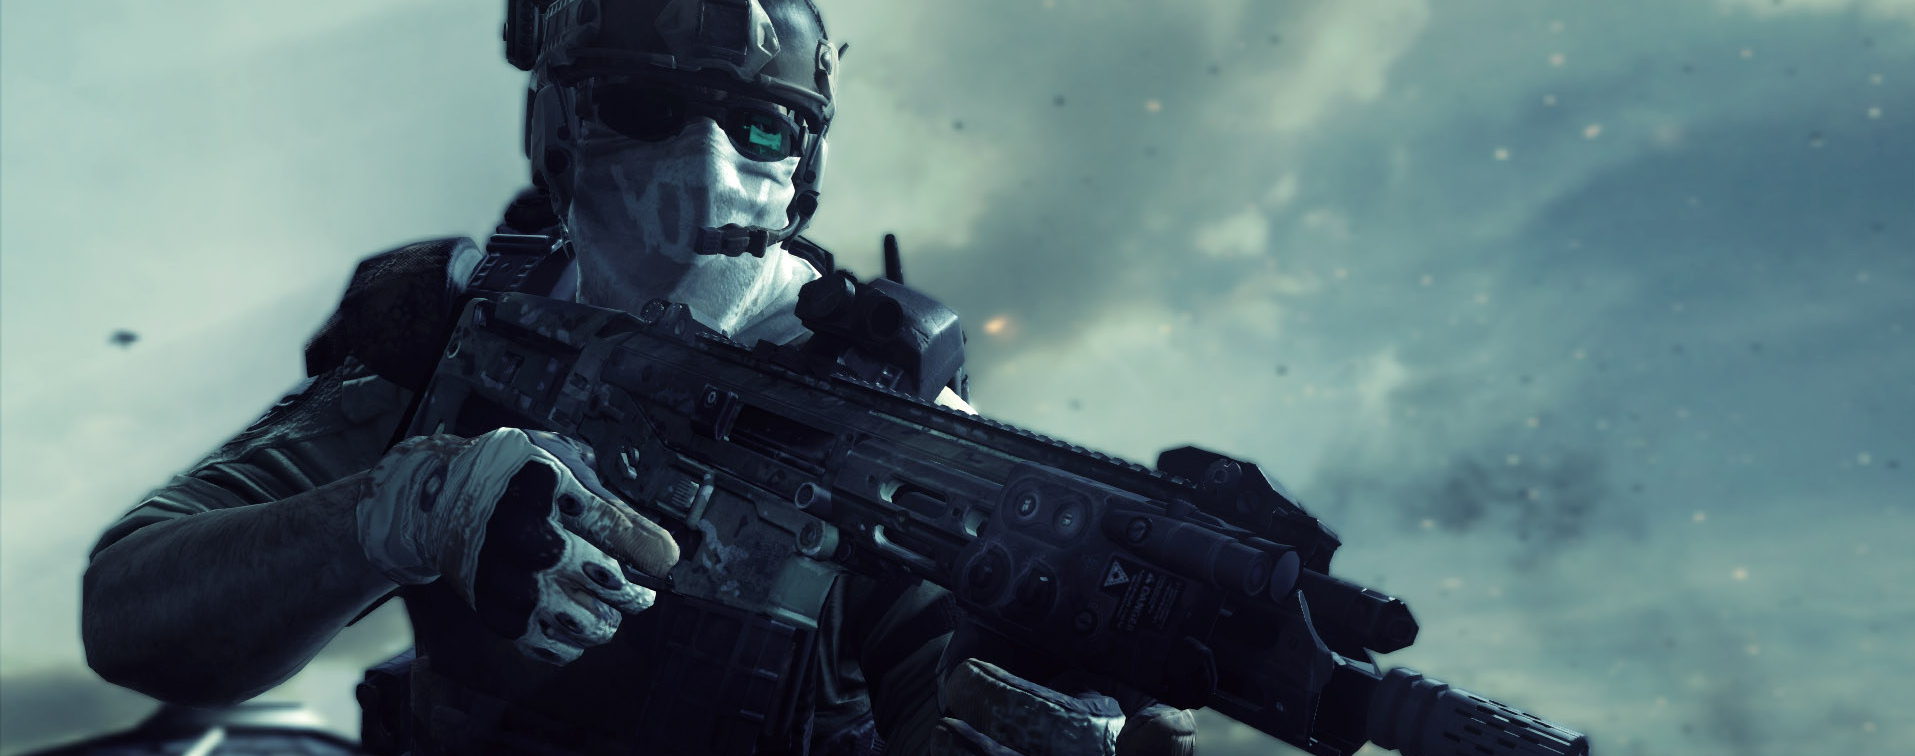 Ghost Recon Wallpaper Games Background HD For Desktop